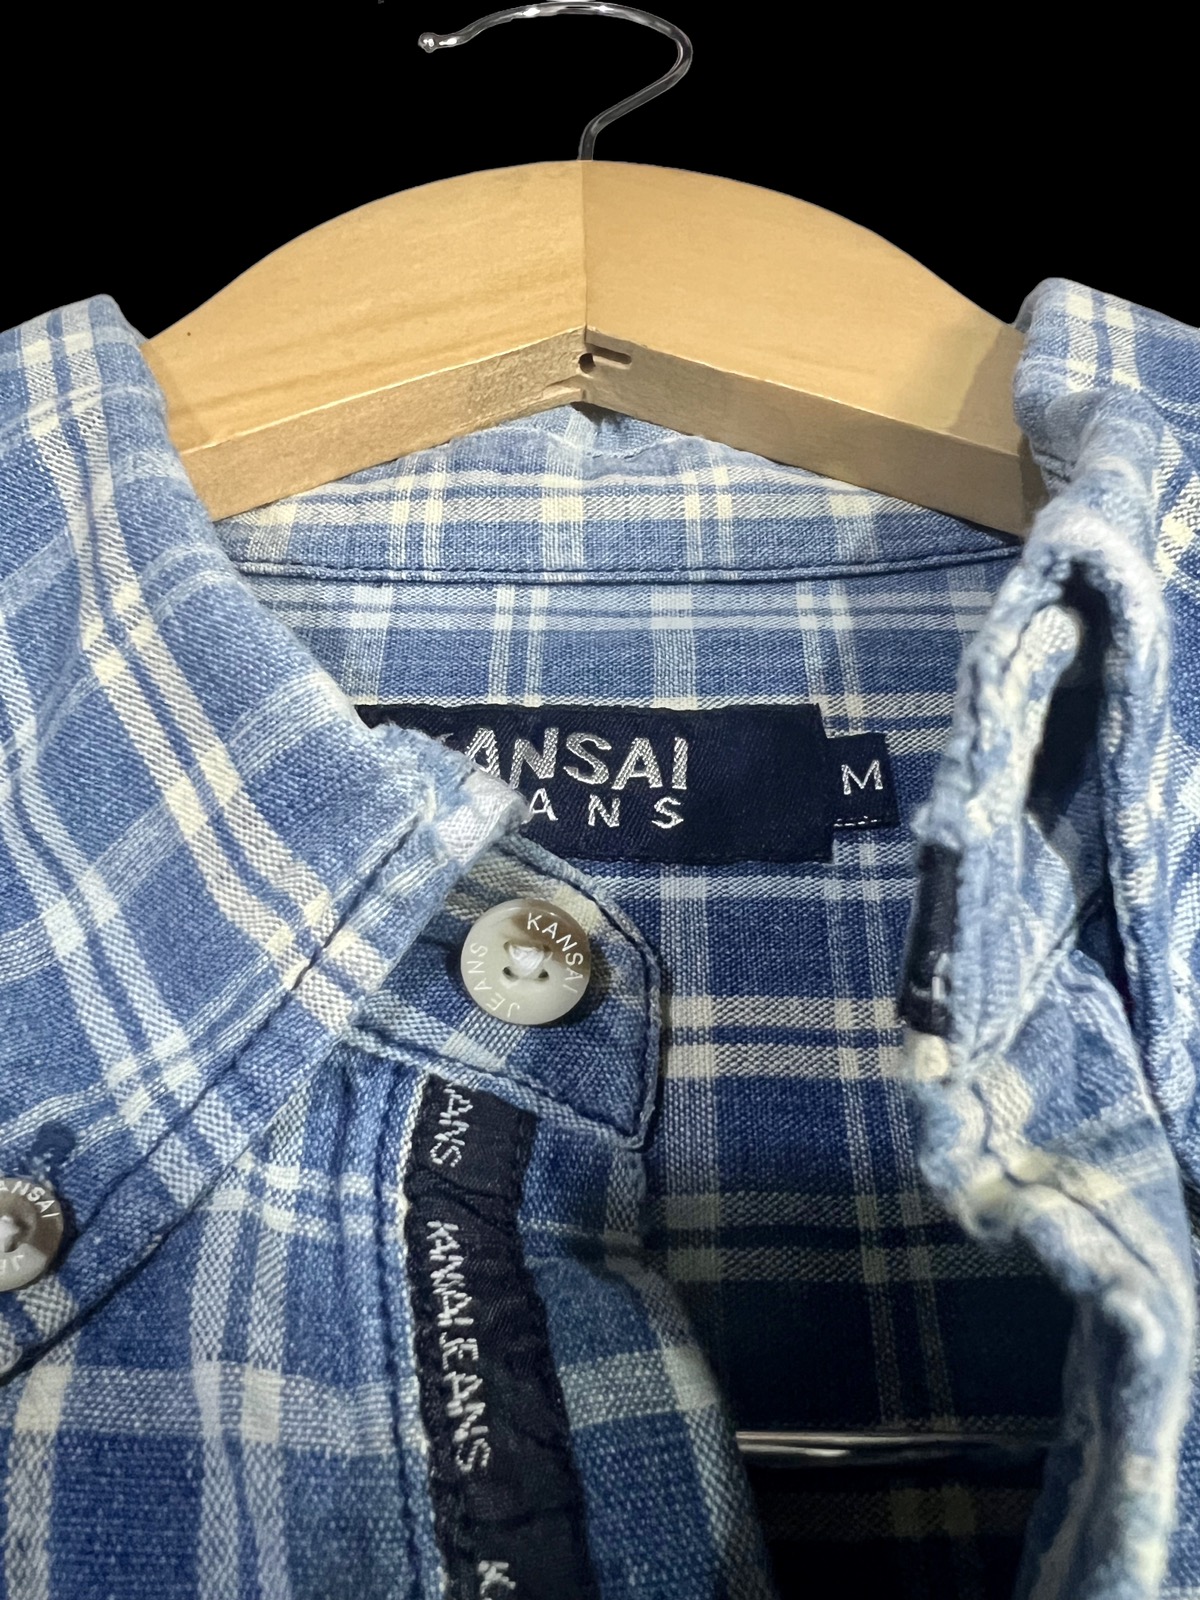 Kansai Yamamoto Kbs - VINTAGE CASUAL FLANNEL KANSAI JEANS WITH SPELLOUT - 5